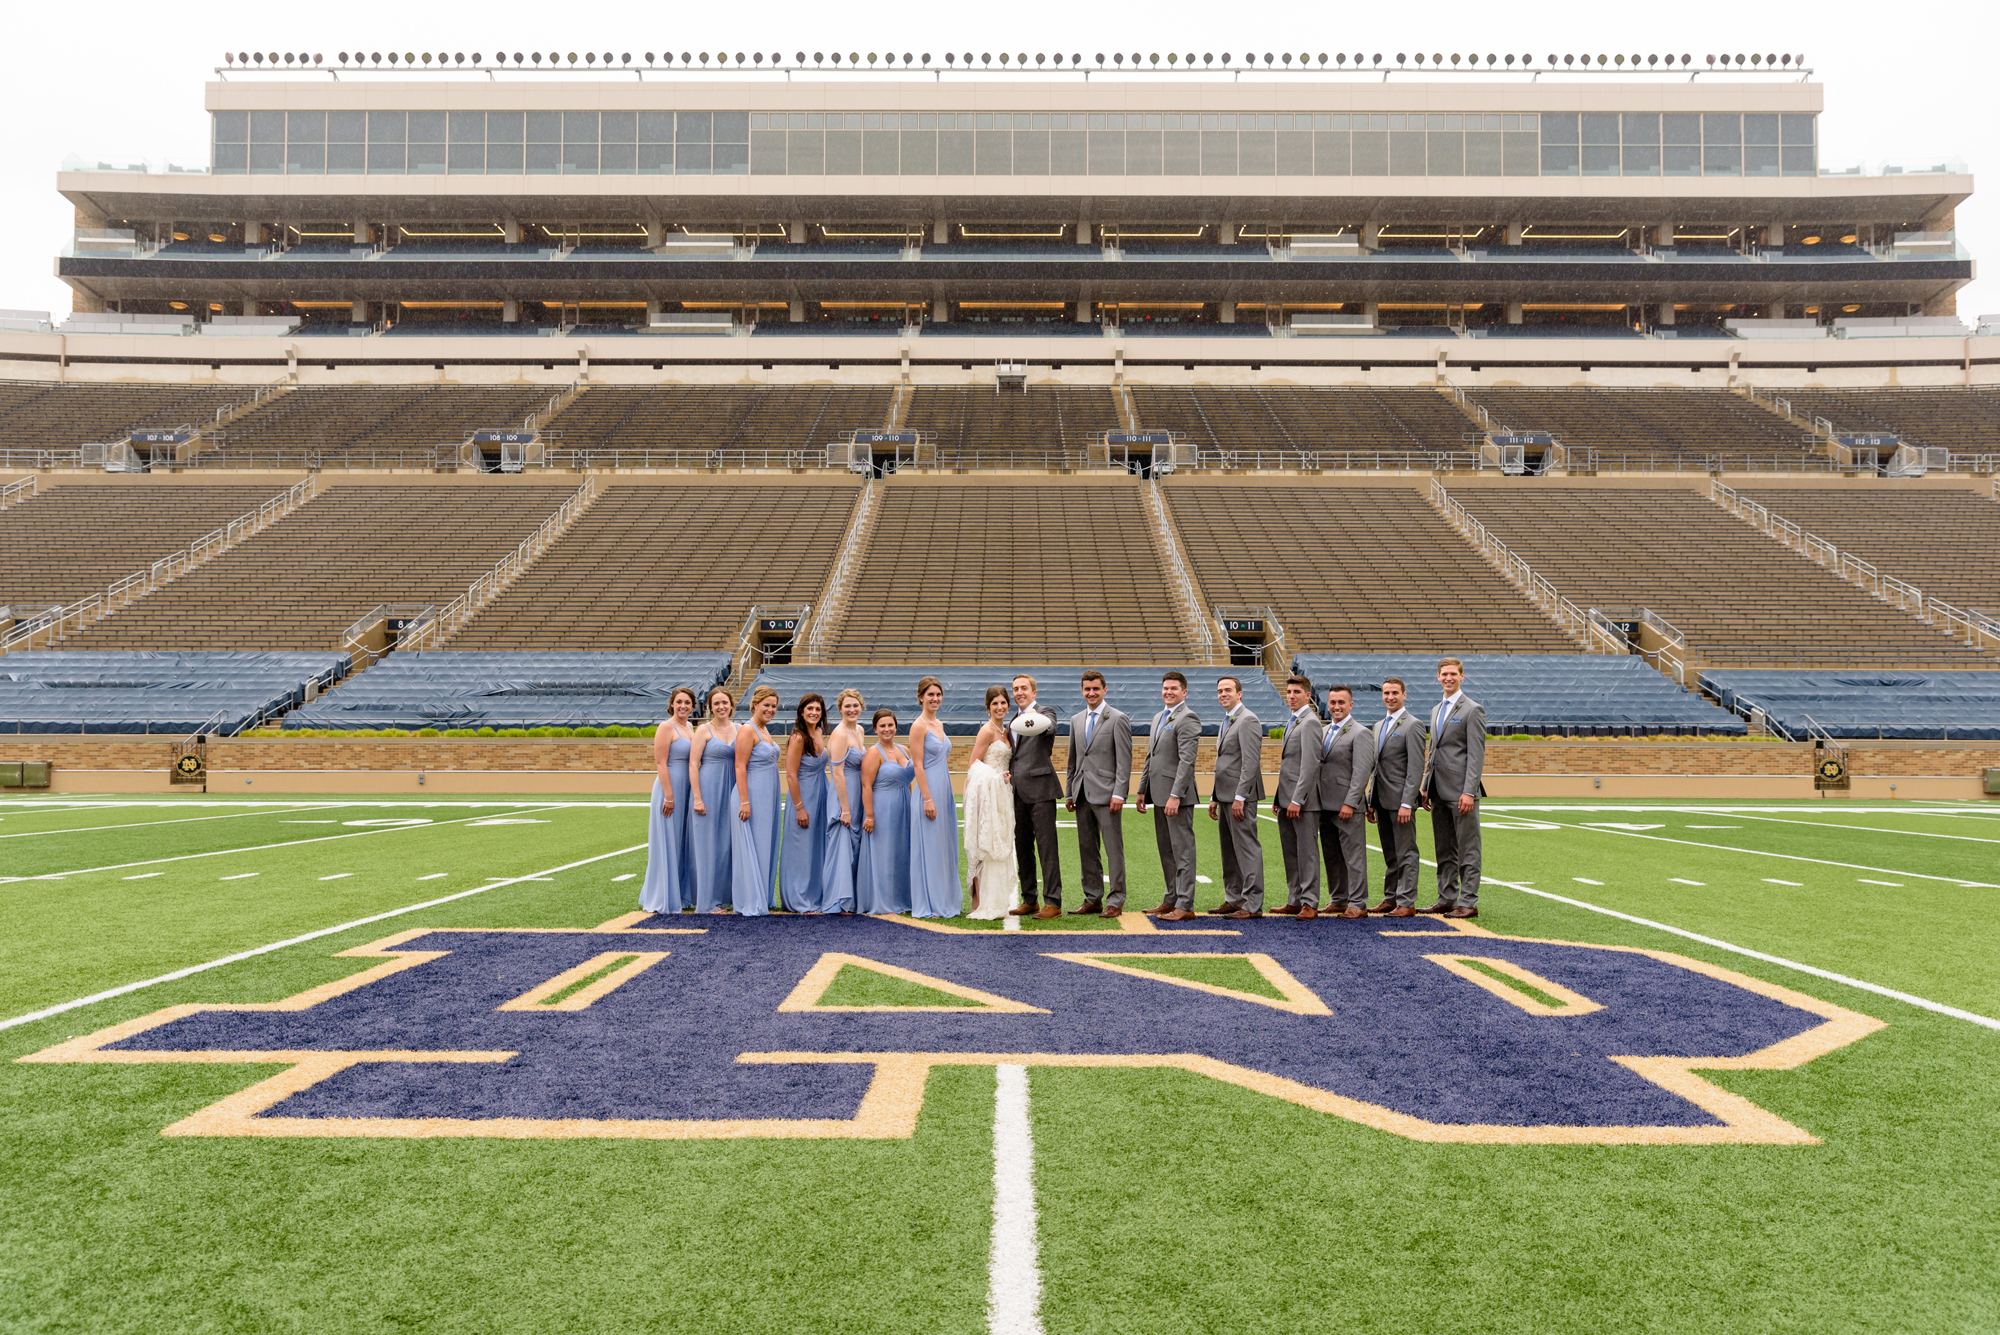 Bridal Party on Notre Dame football field after their wedding ceremony at the Basilica of the Sacred Heart on the campus of the University of Notre Dame